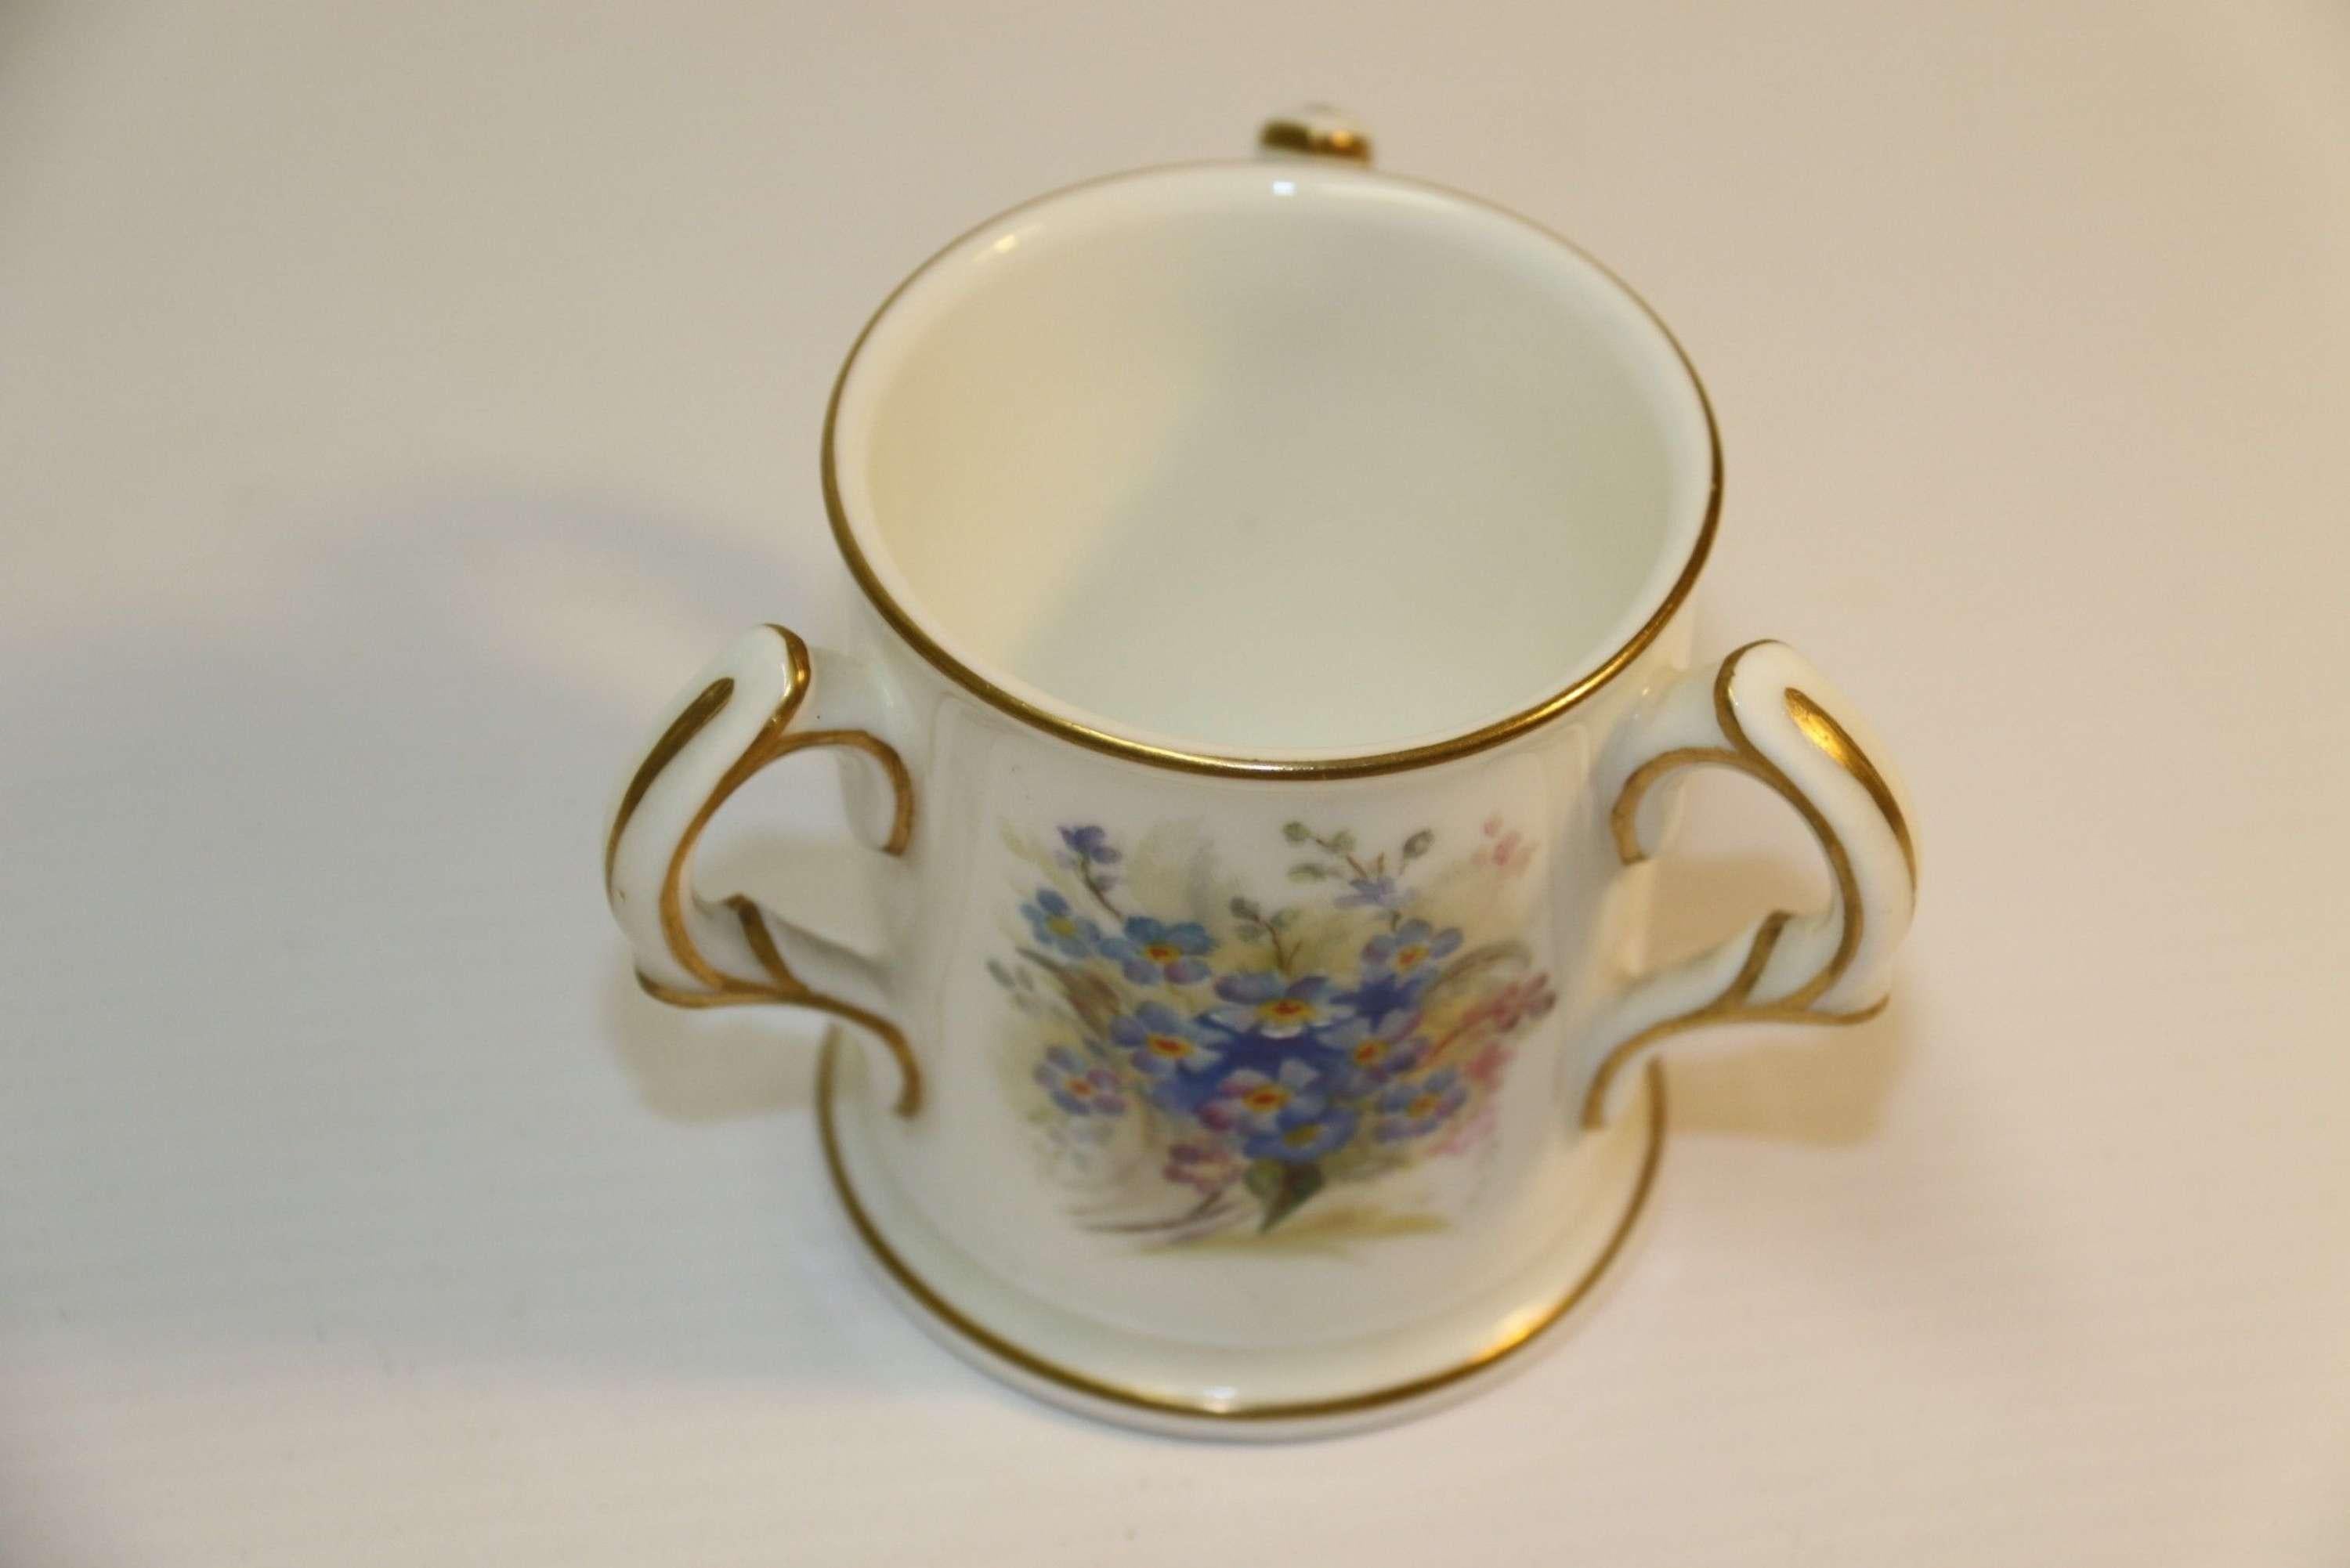 Edwardian Early 20th Century Miniature Royal Worcester Porcelain Loving Cup English, 1922 For Sale